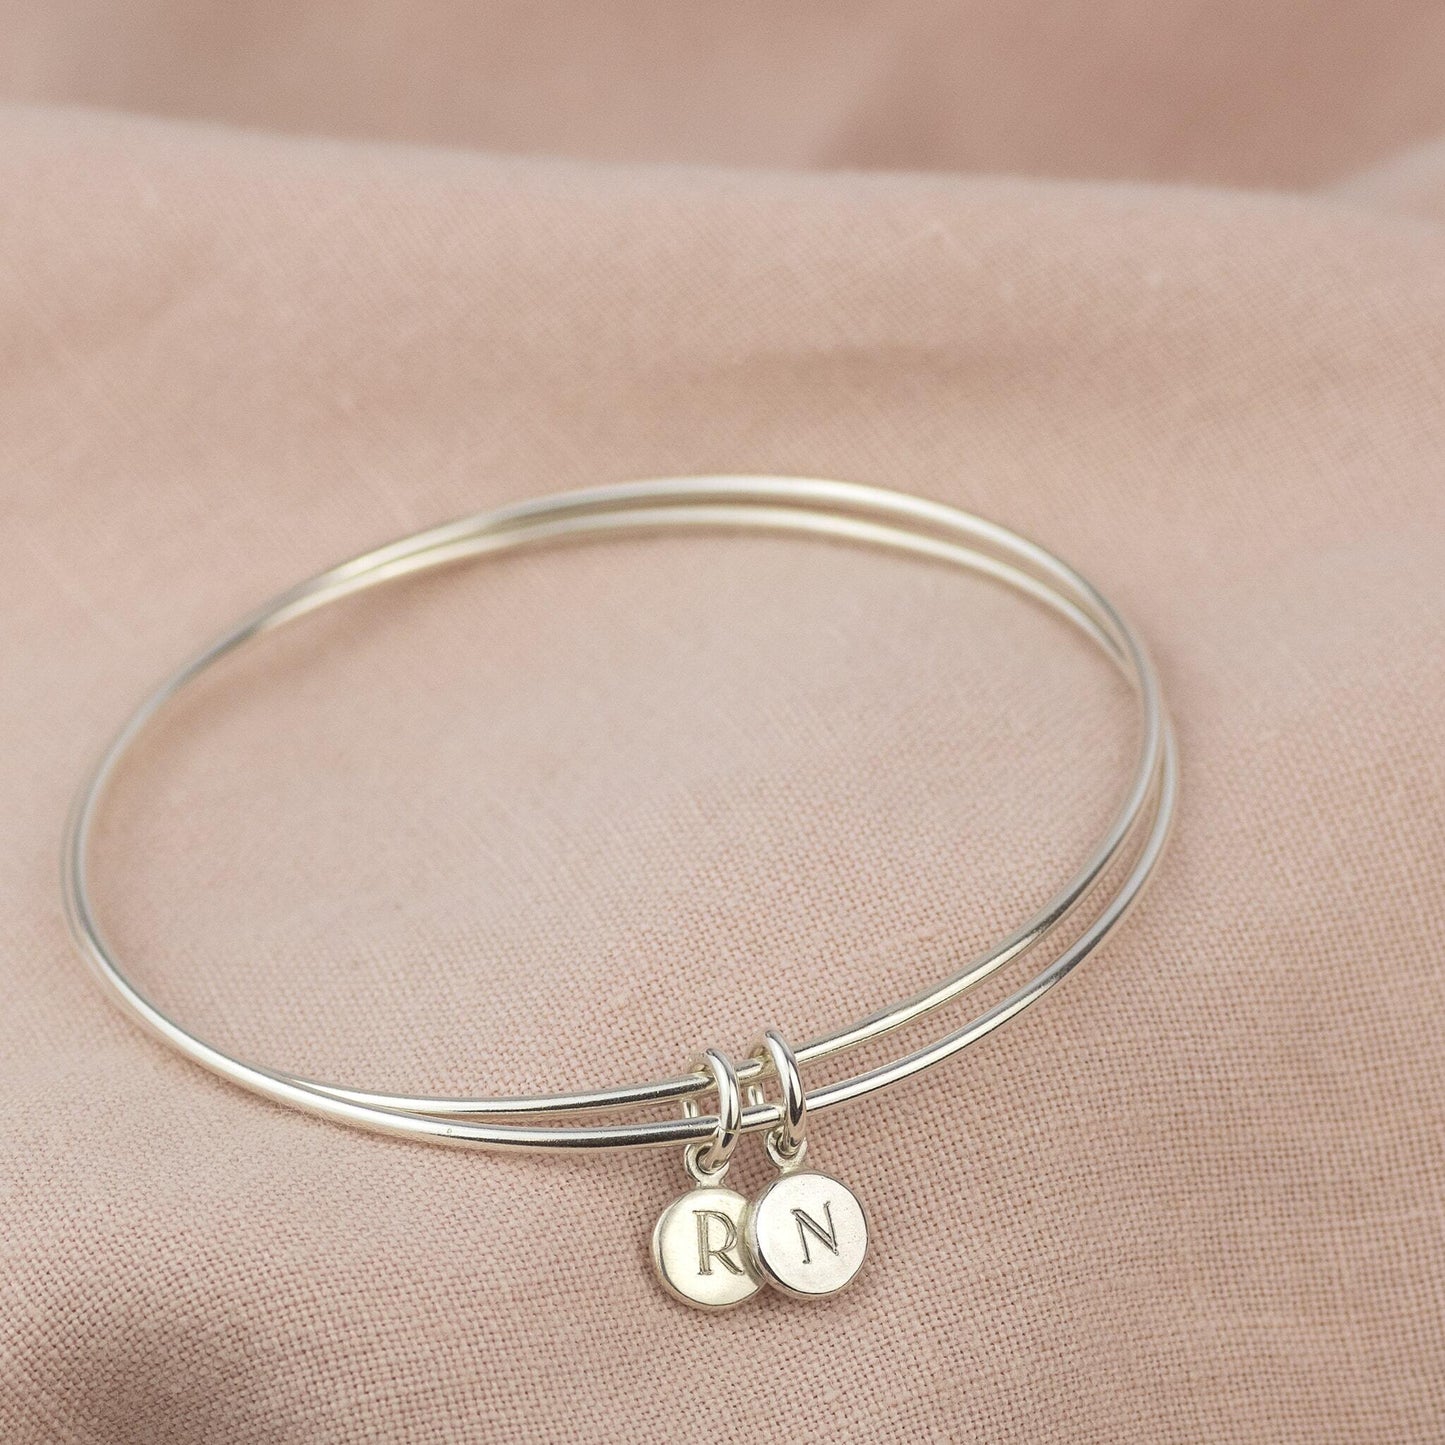 Personalised Sisters Bracelet - Double Linked Bangle - Linked for a Lifetime